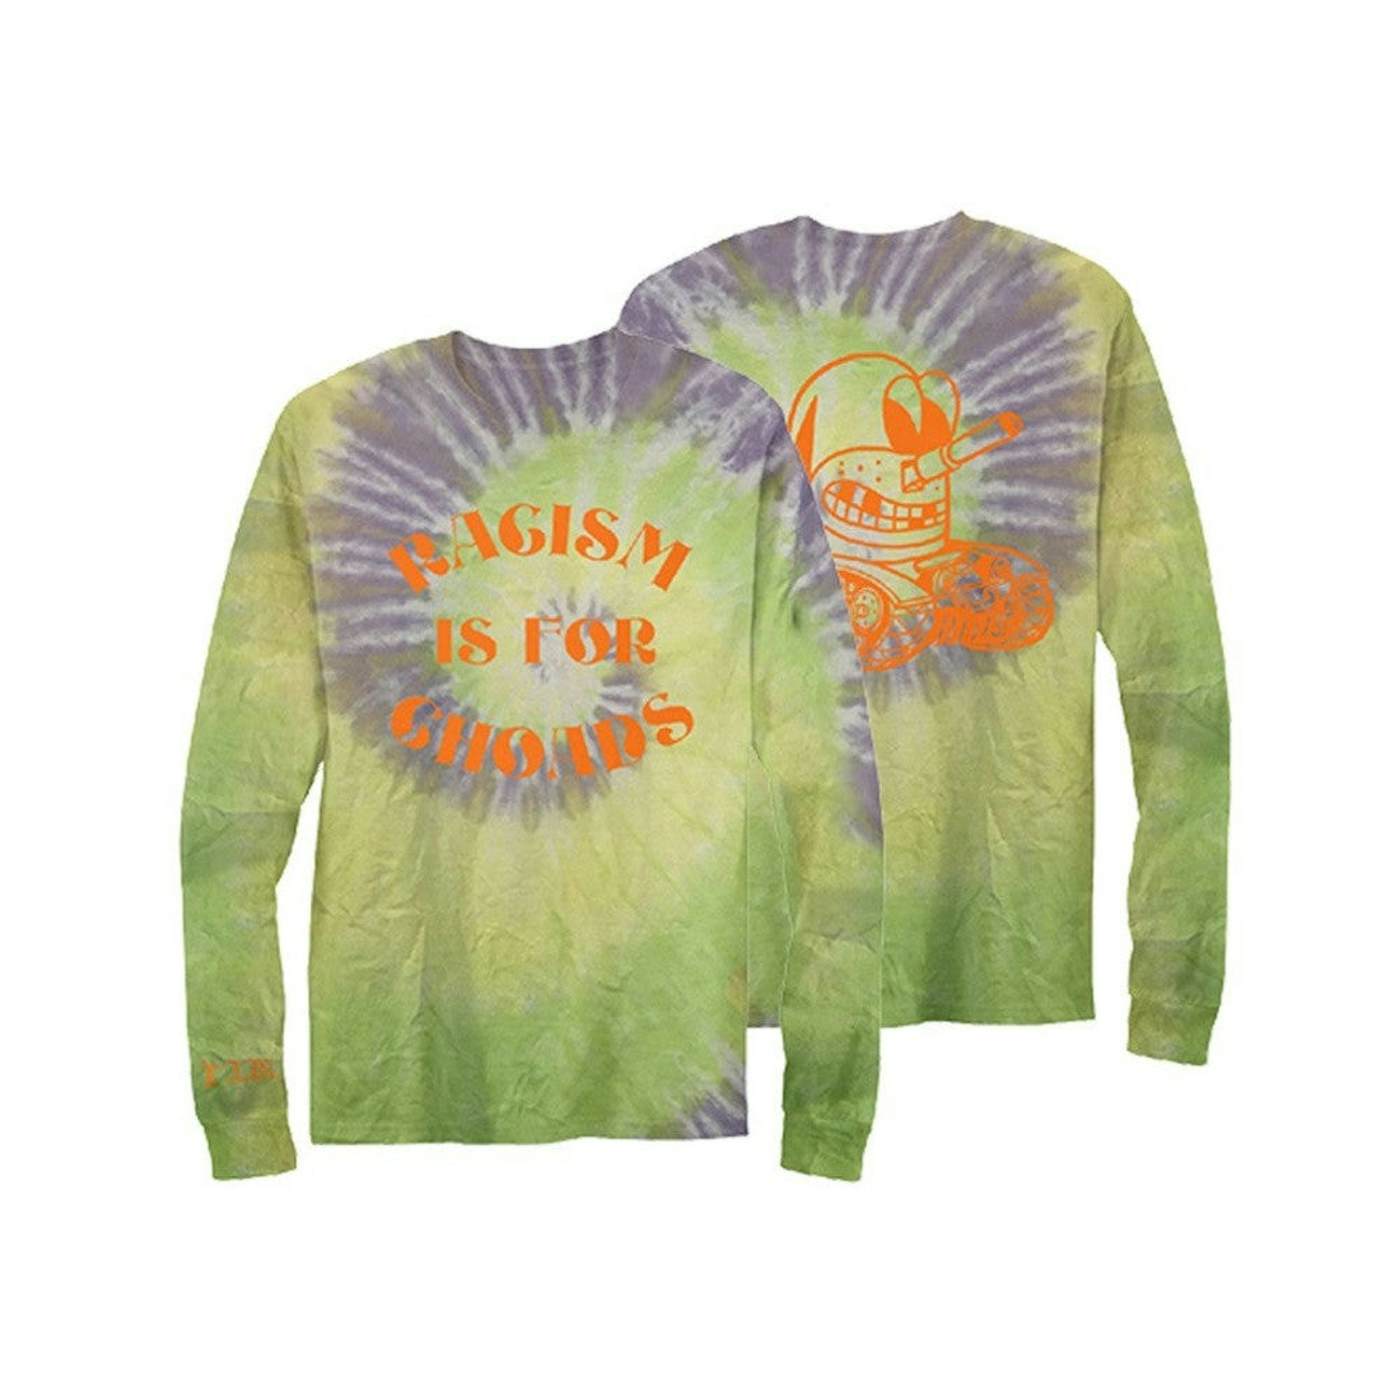 Portugal. The Man Racism Is For Choads Longsleeve (Tie Dye)